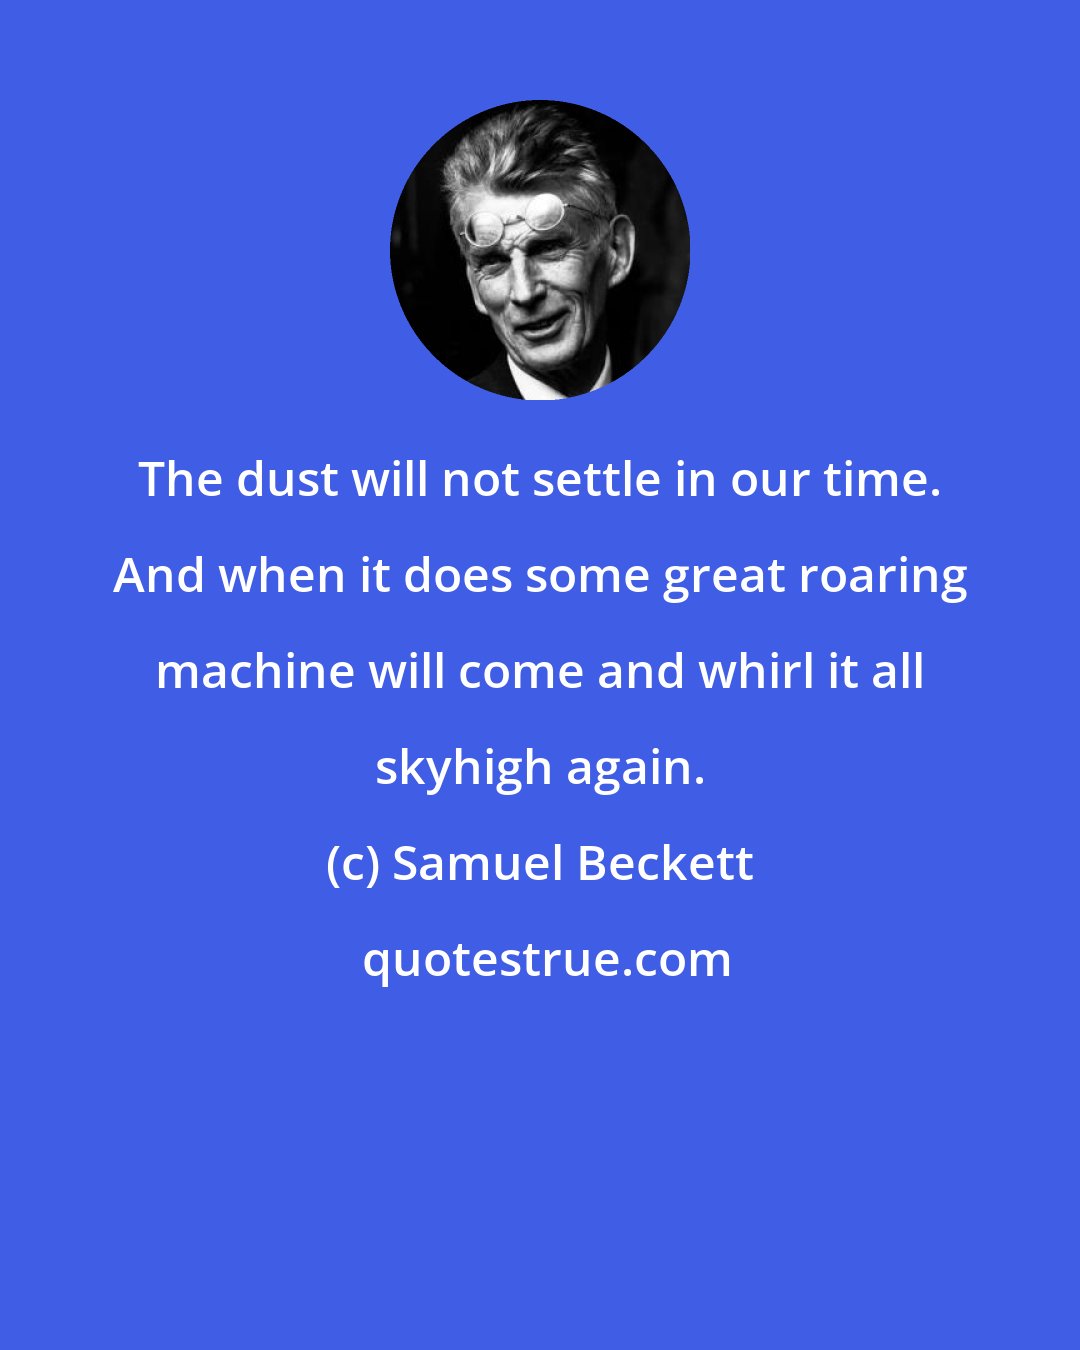 Samuel Beckett: The dust will not settle in our time. And when it does some great roaring machine will come and whirl it all skyhigh again.